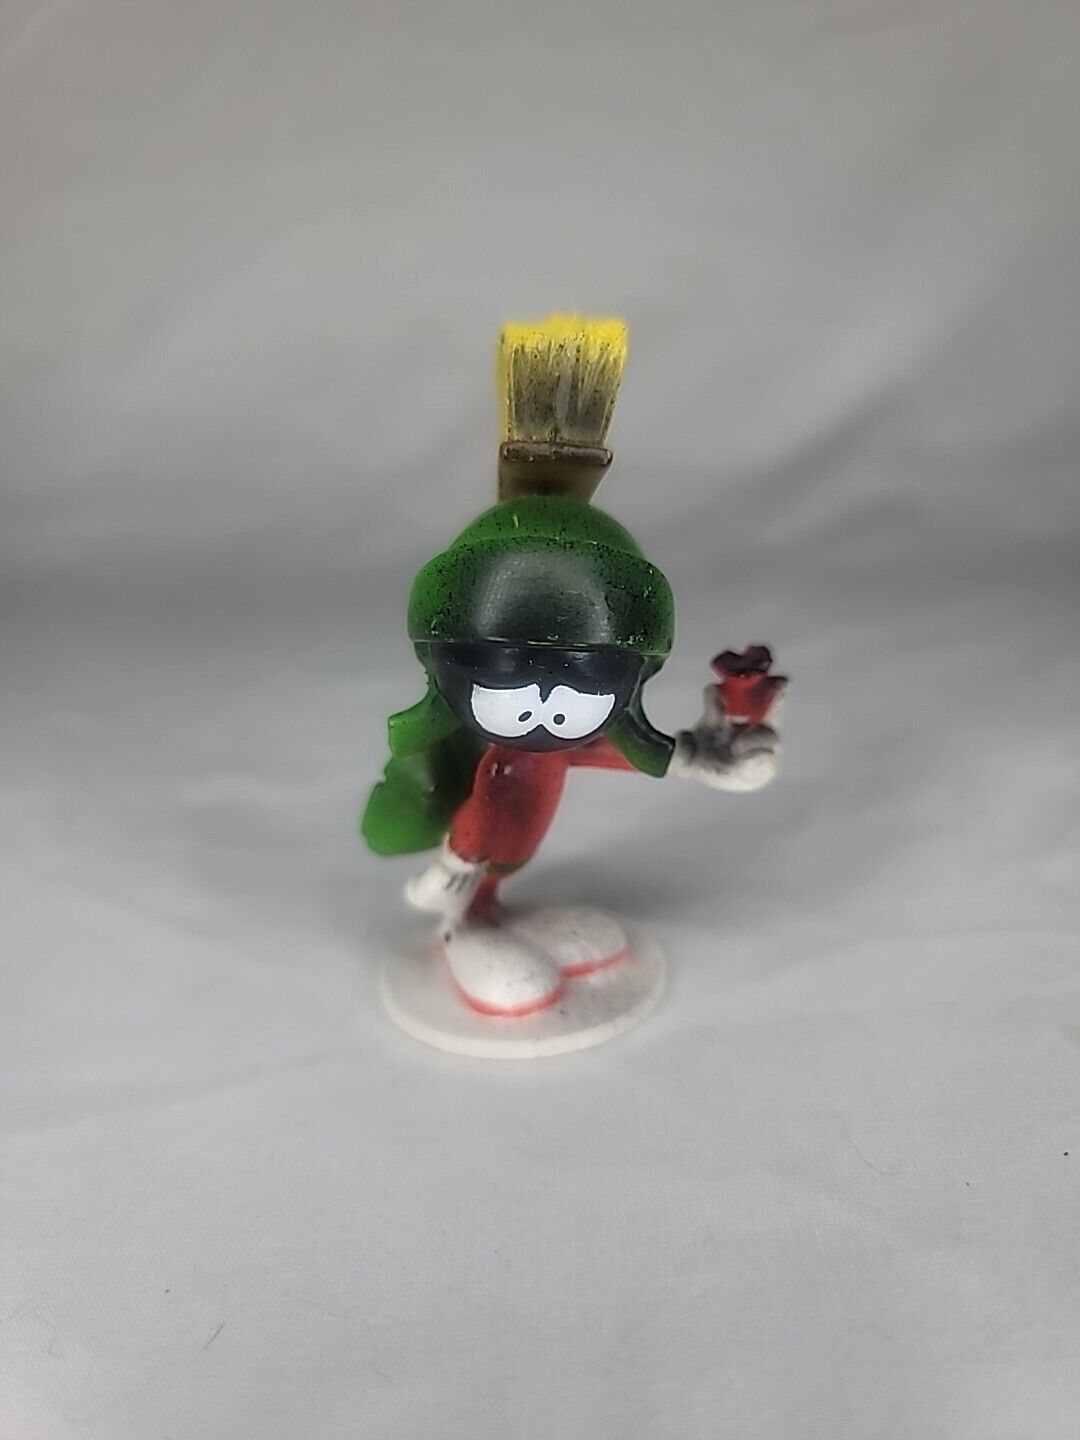 Vintage 1994 Applause Looney Tunes Marvin The Martian PVC Figure